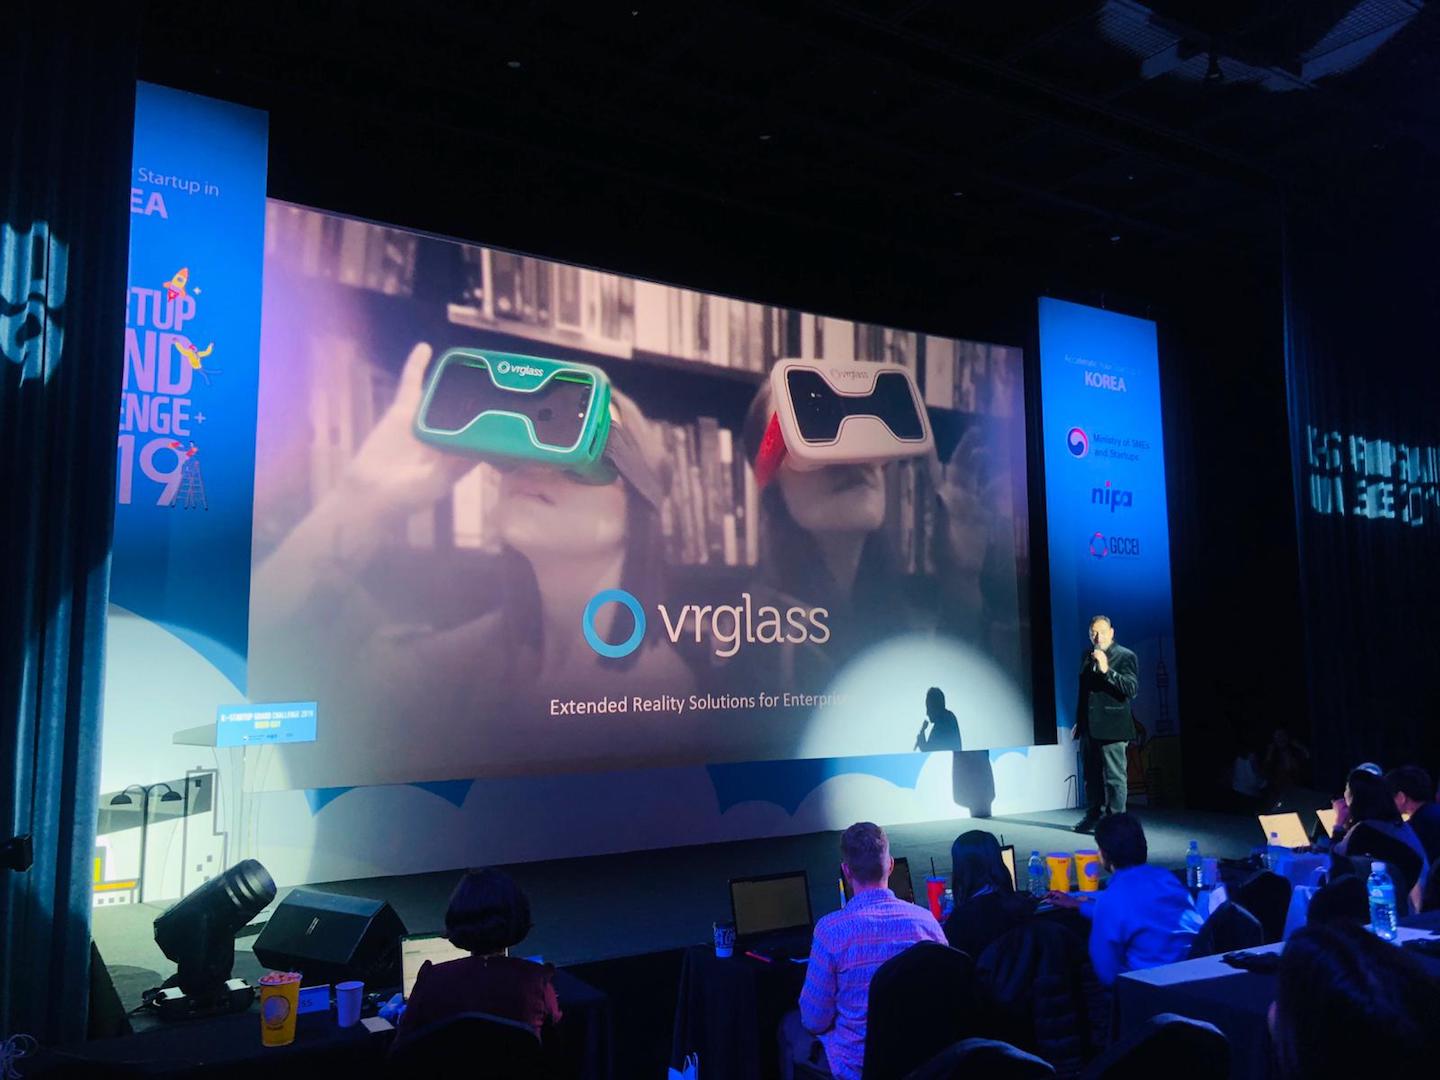 Brazil,VRGlass presents its product at the 2019 KSGC competition in Seoul.